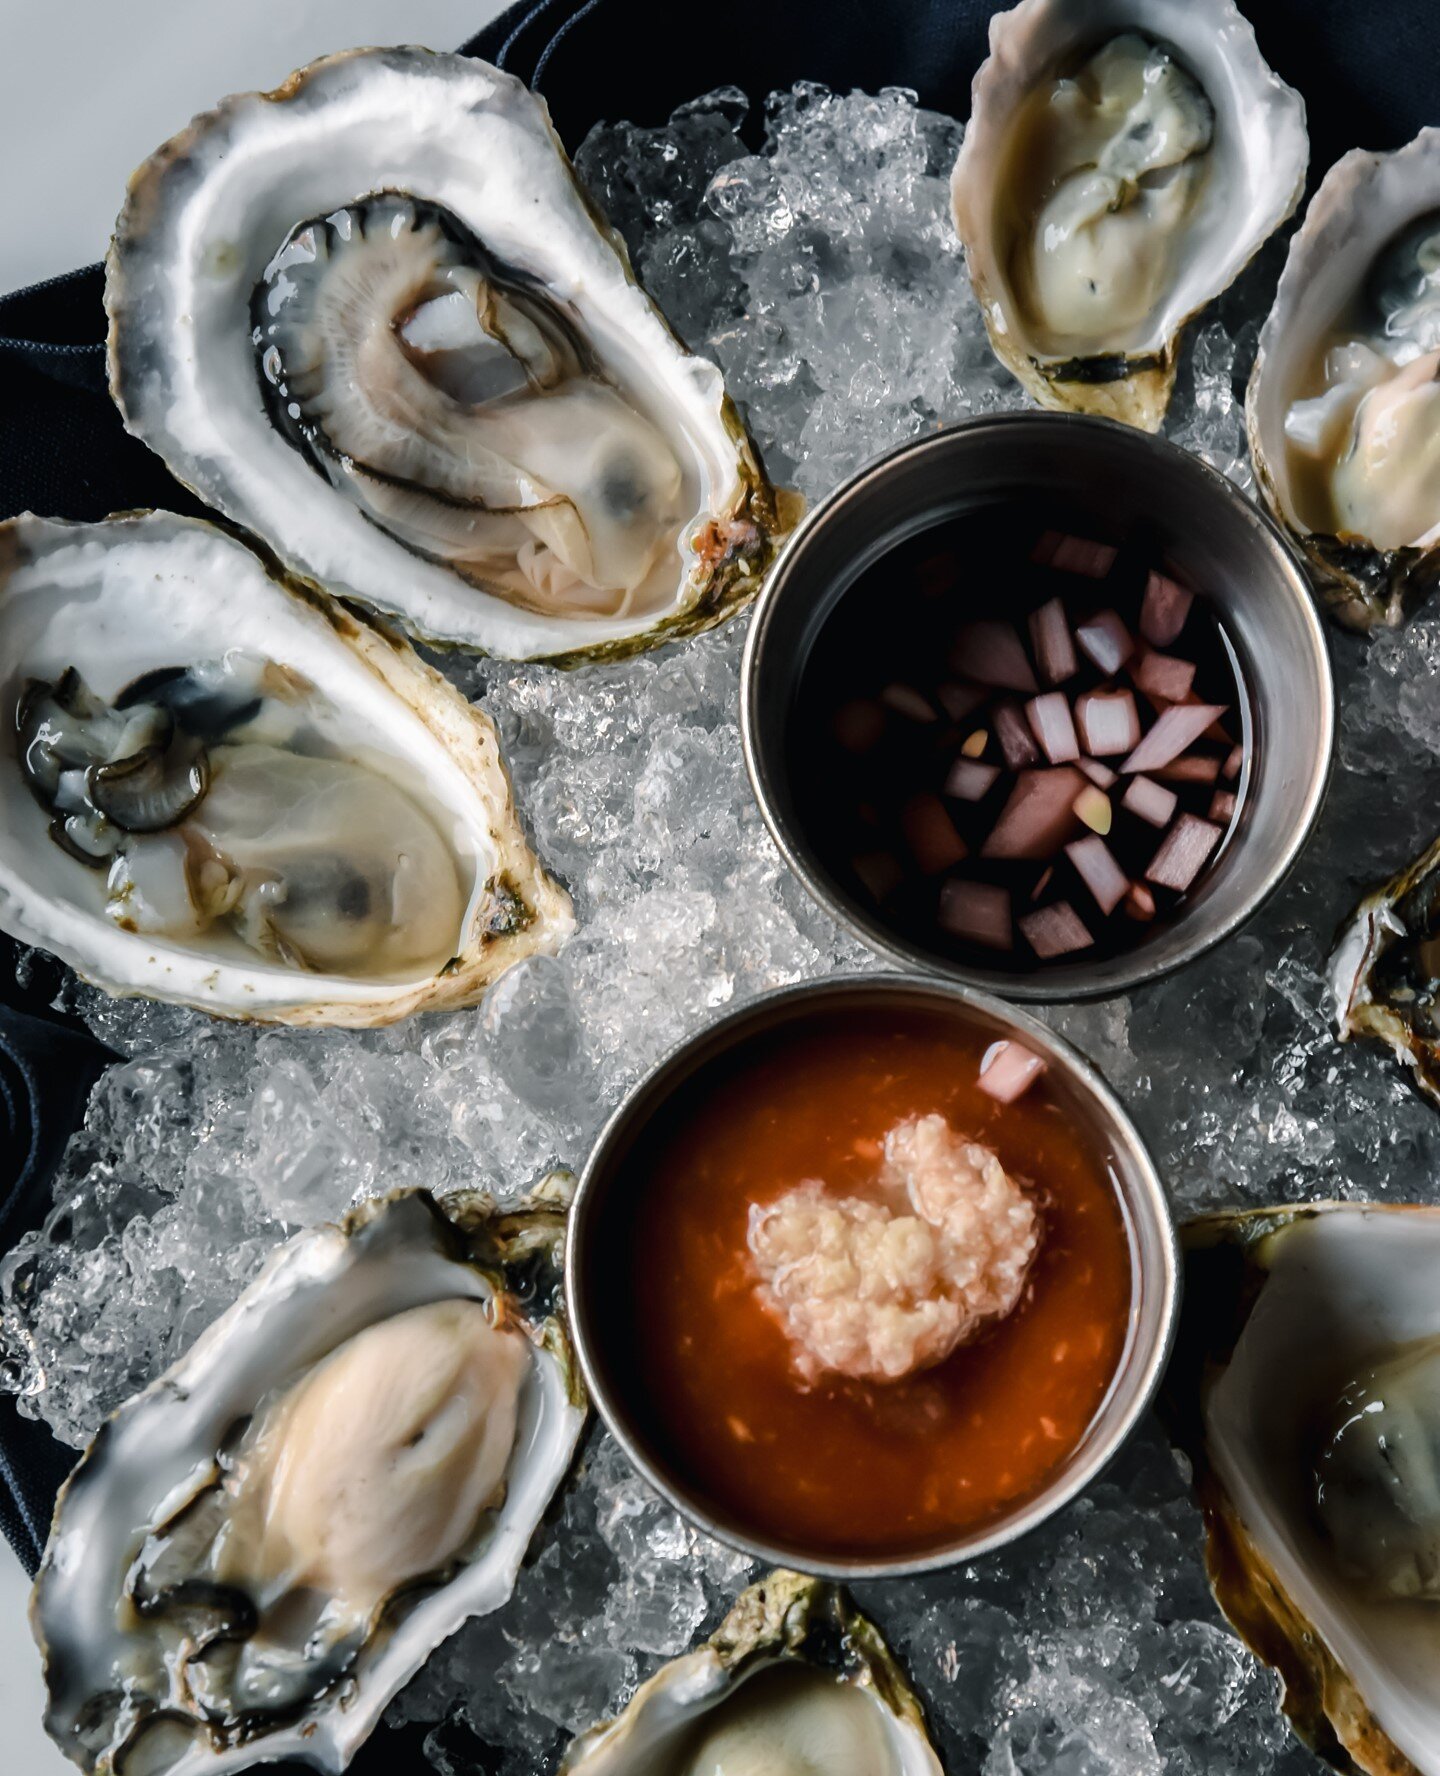 Oysters?⁠
Shuck Yeah!⁠
🦪 🦪 🦪 ⁠
⁠
#thisiscle #ohiofinditthere #ohioexplored #eatlocalohio #localeats  #cleveland #clevelandohio #clefoodies #cle #216 #clevelandrocks #clevelandscene #clevelandfoodies #clefood #clevelandfoodscene #cleeats #cleveland